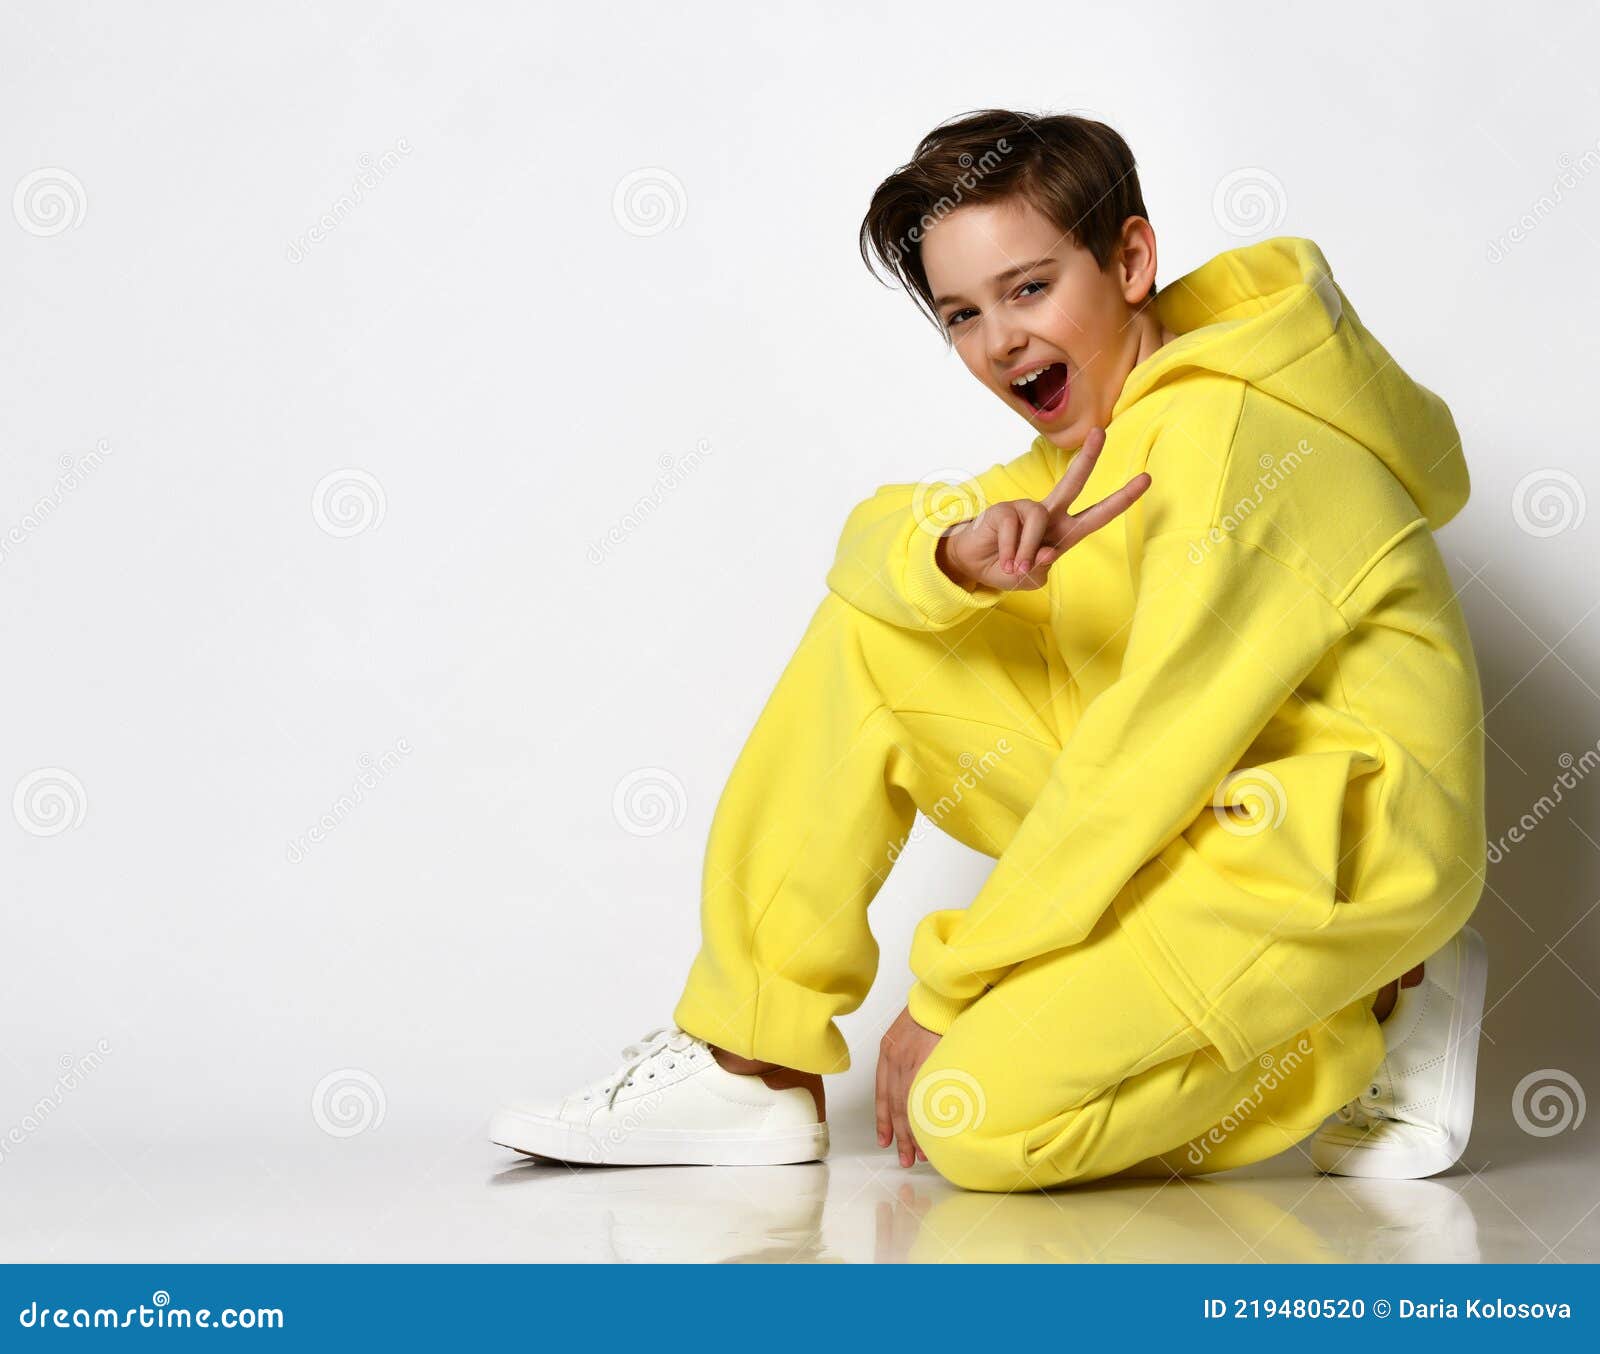 Stylish Active Guy in a Bright Yellow Sports Suit Having Fun on a White  Background. Stock Photo - Image of beautiful, sport: 219480520